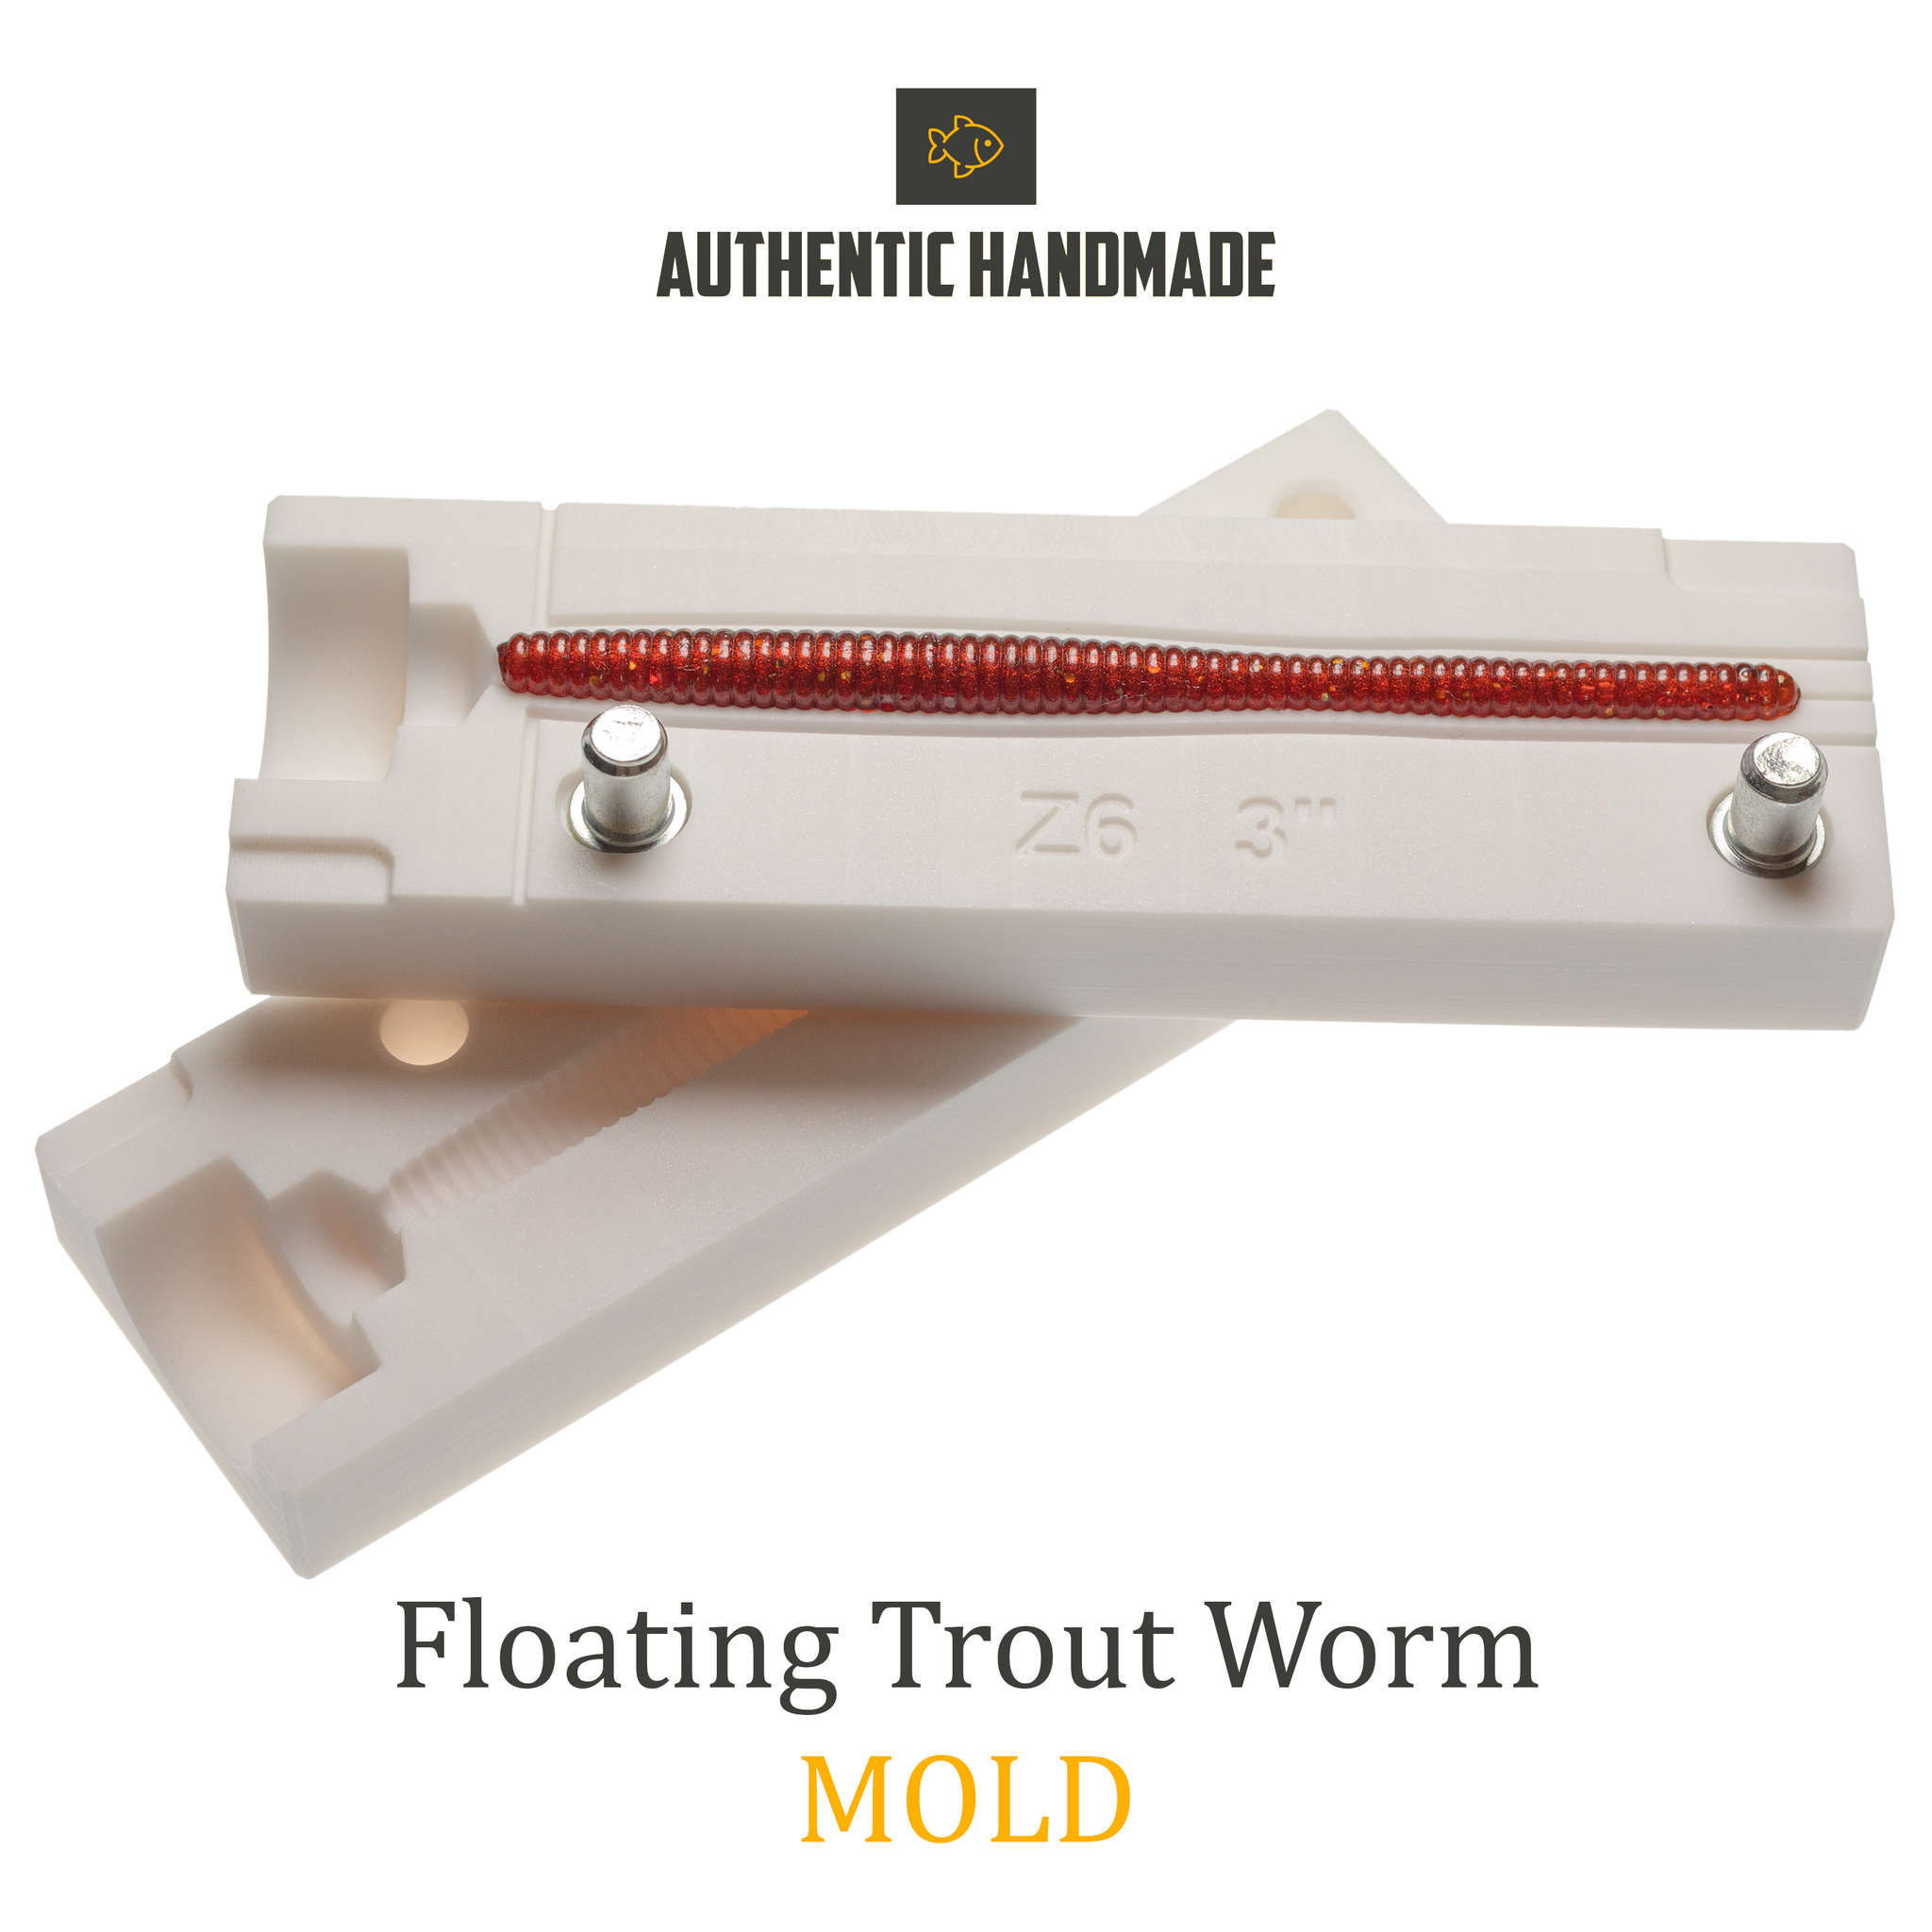 Floating Trout Worm Soft Plastic Bait Mold DIY Lure – Authentic Handmade